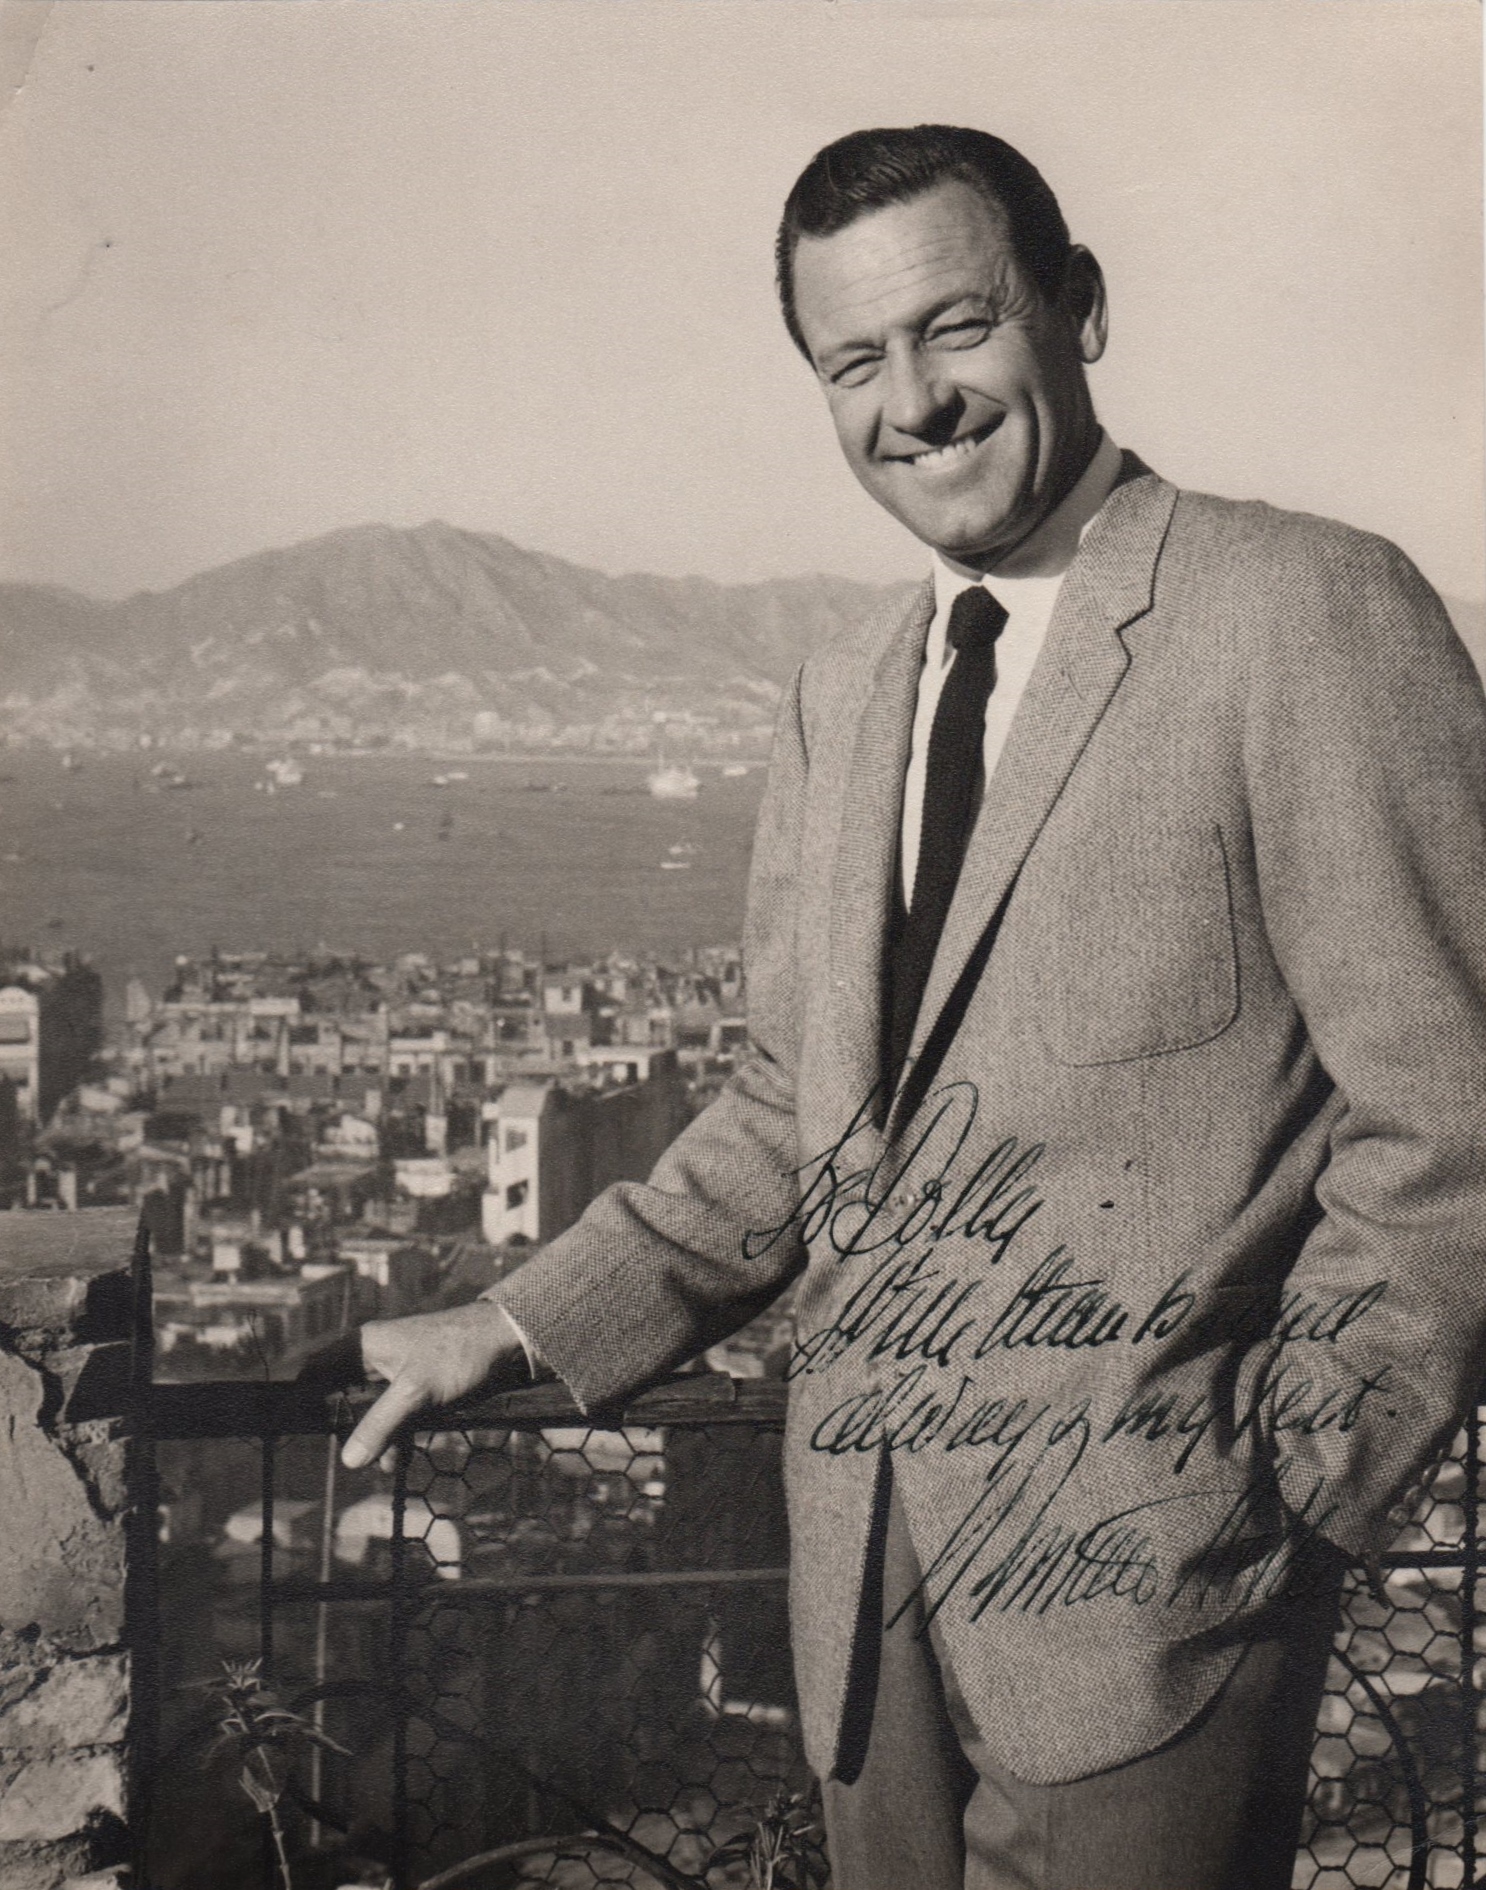 HOLDEN WILLIAM: (1918-1981) American Actor, Academy Award winner. Vintage signed and inscribed 7.